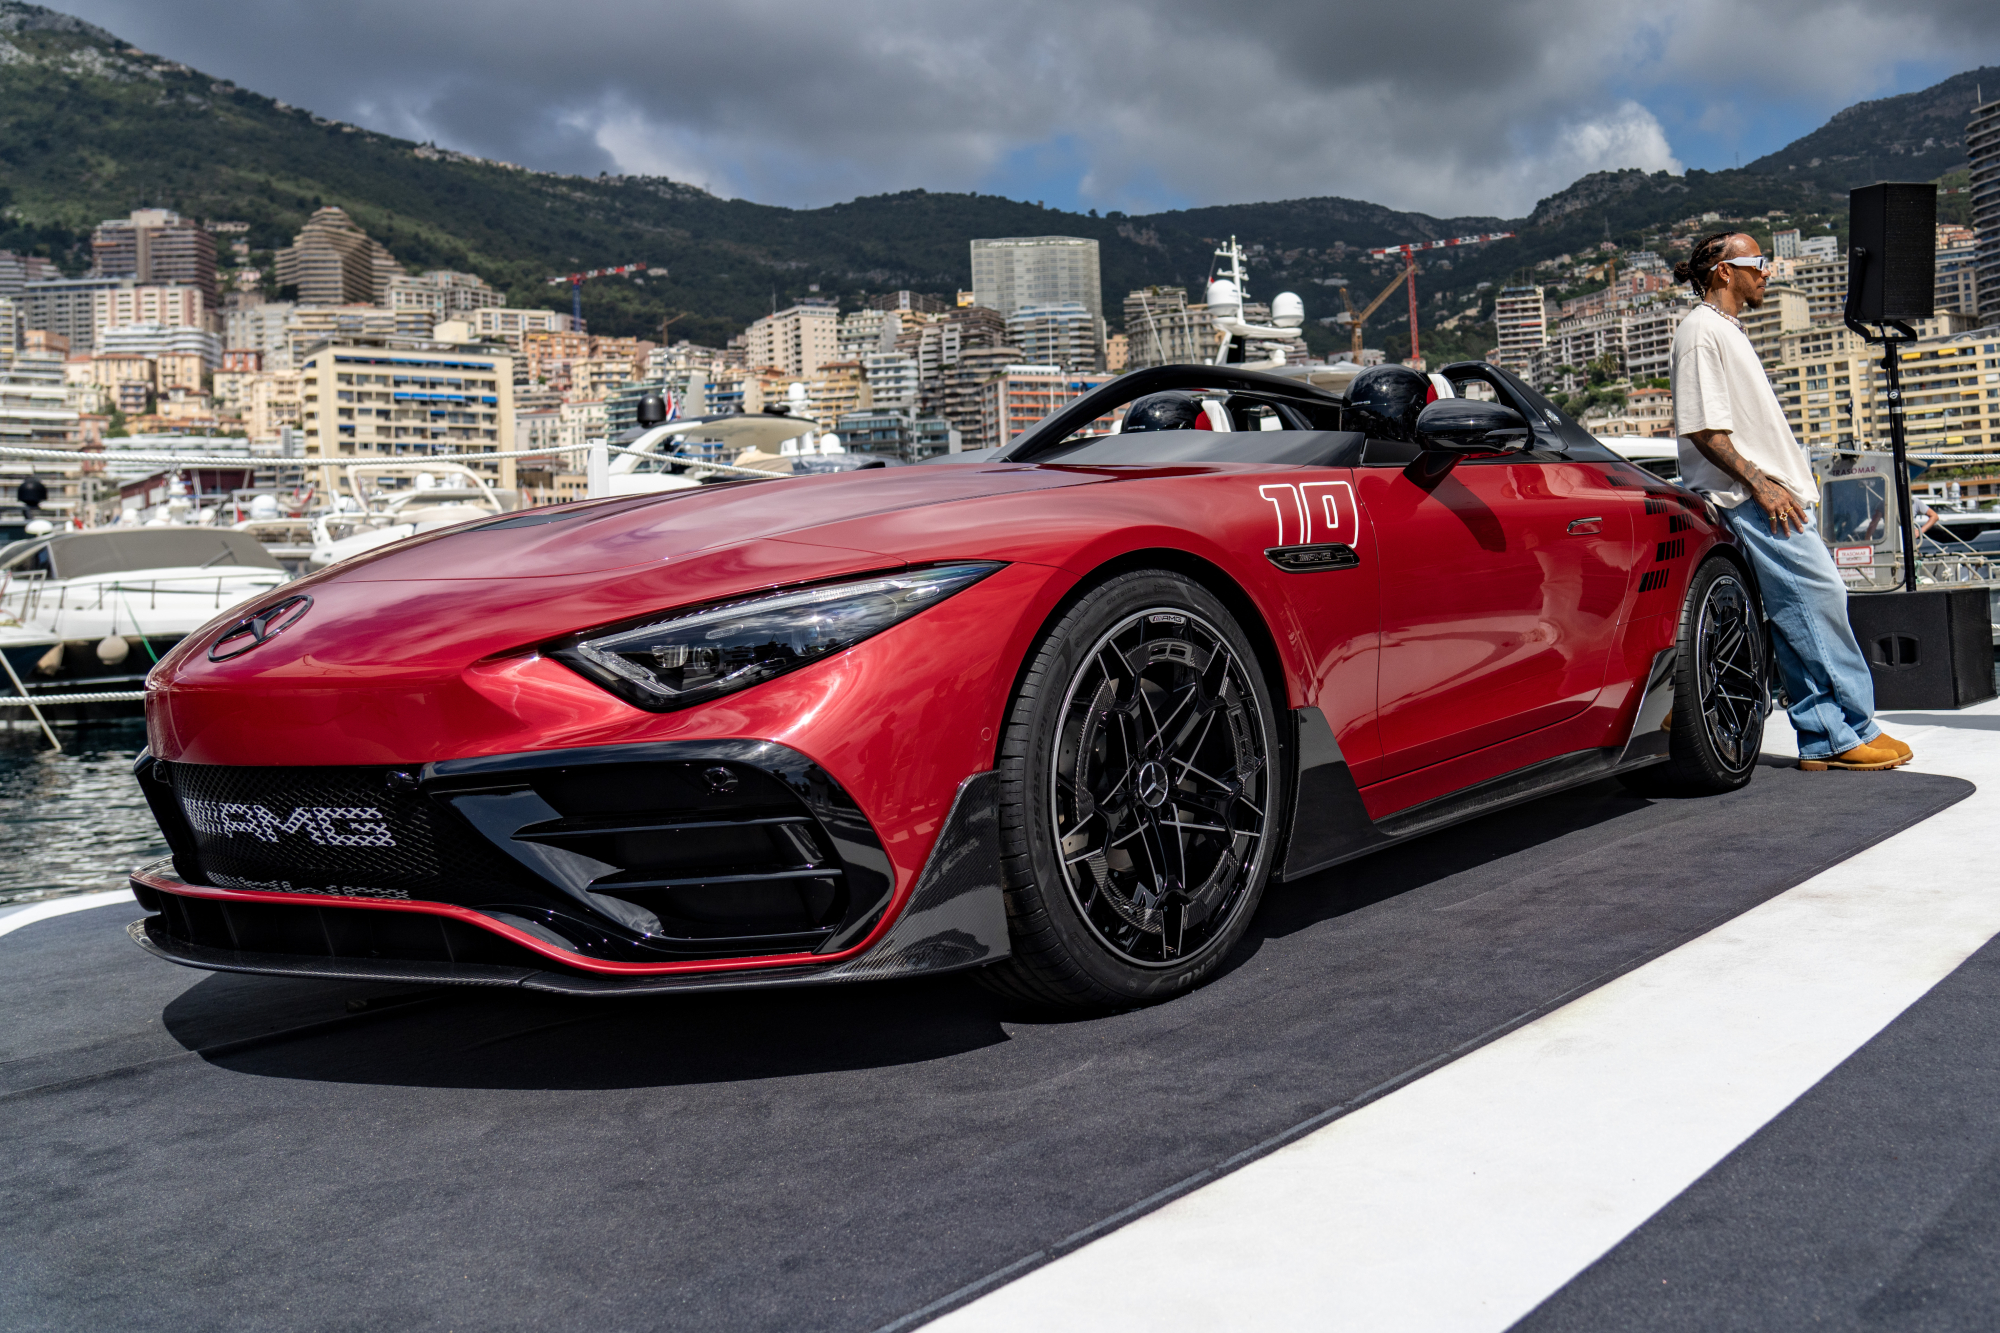 F1 World Champion driver Lewis Hamilton with Mercedes-AMG PureSpeed Concept on display in the harbor of Monaco.